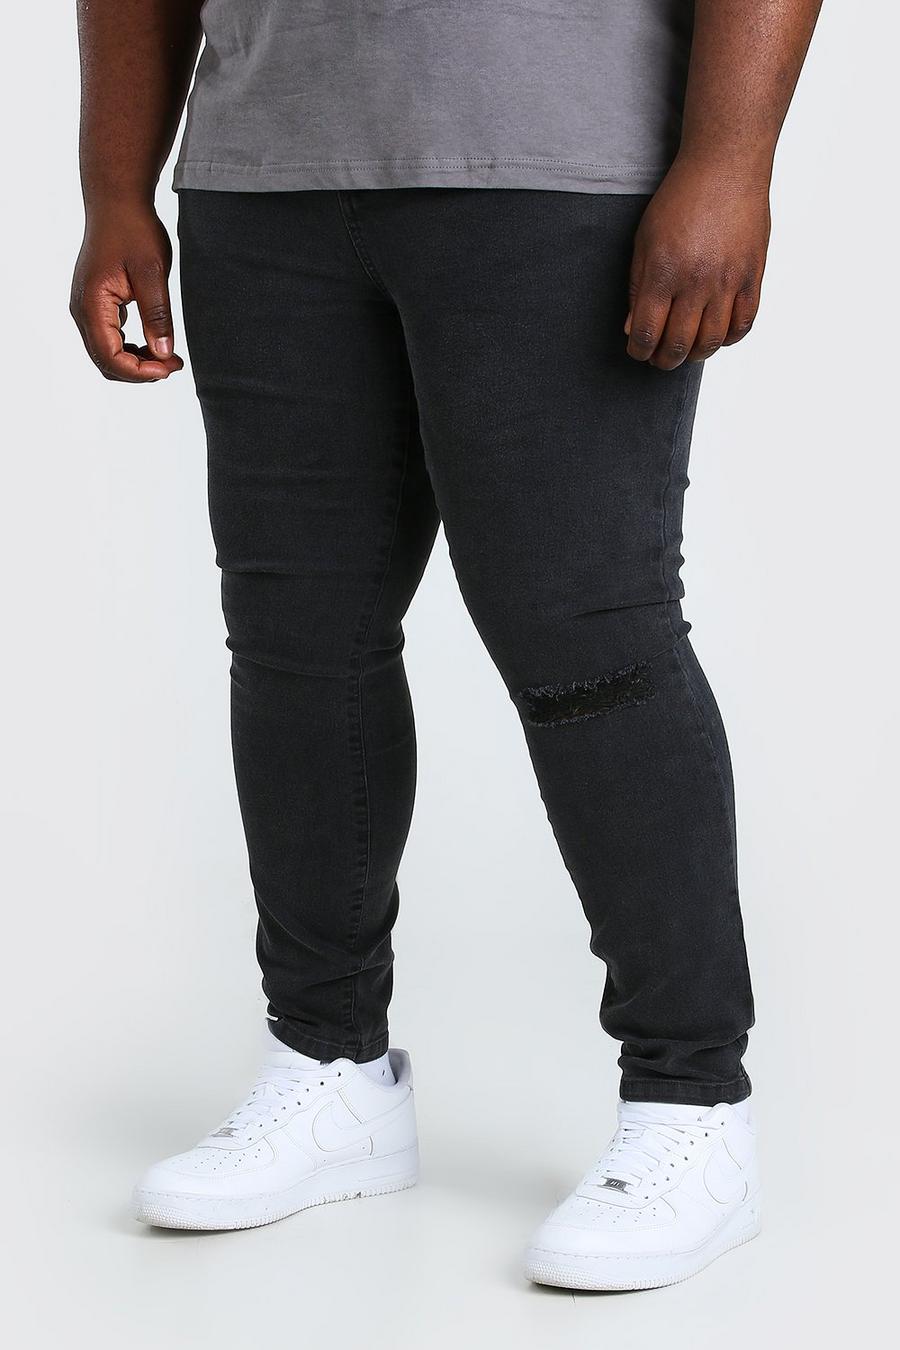 Charcoal gris Plus Size Busted Knee Super Skinny Jean image number 1